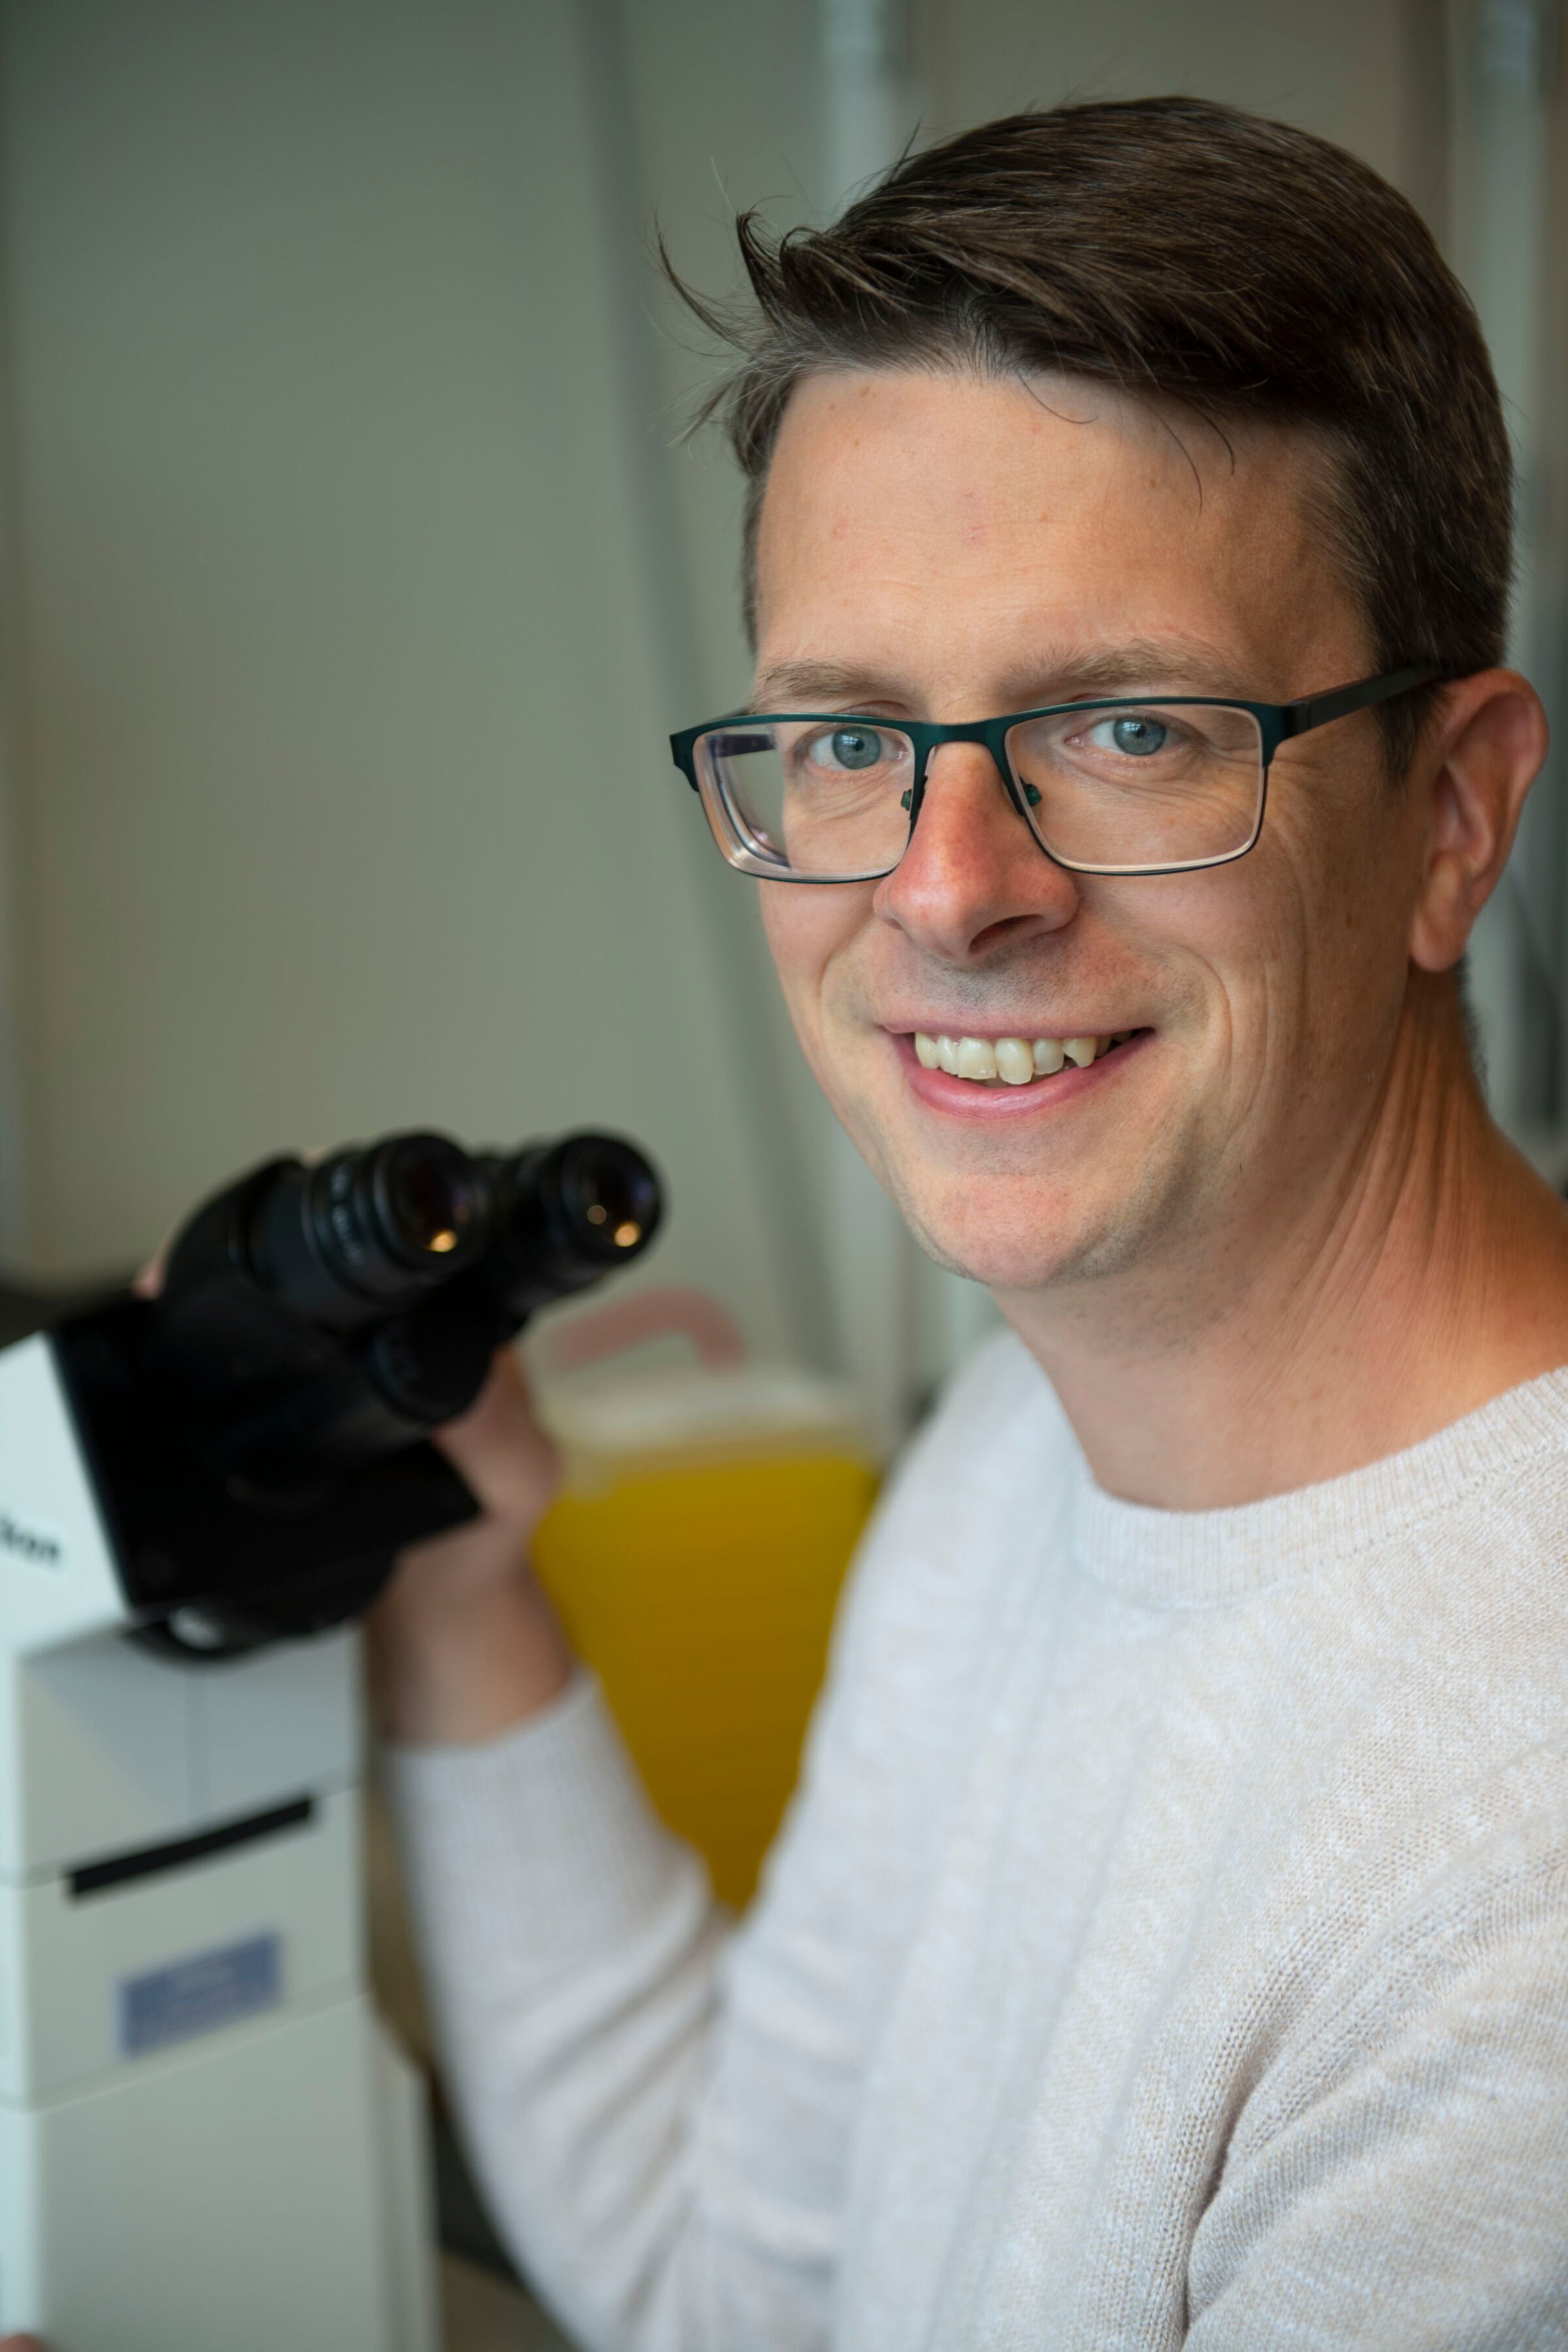 Fredrik Lanner, researcher at the Department of Clinical Science, Intervention and Technology and the Ming Wai Lau Centre for Reparative Medicine at Karolinska Institutet.